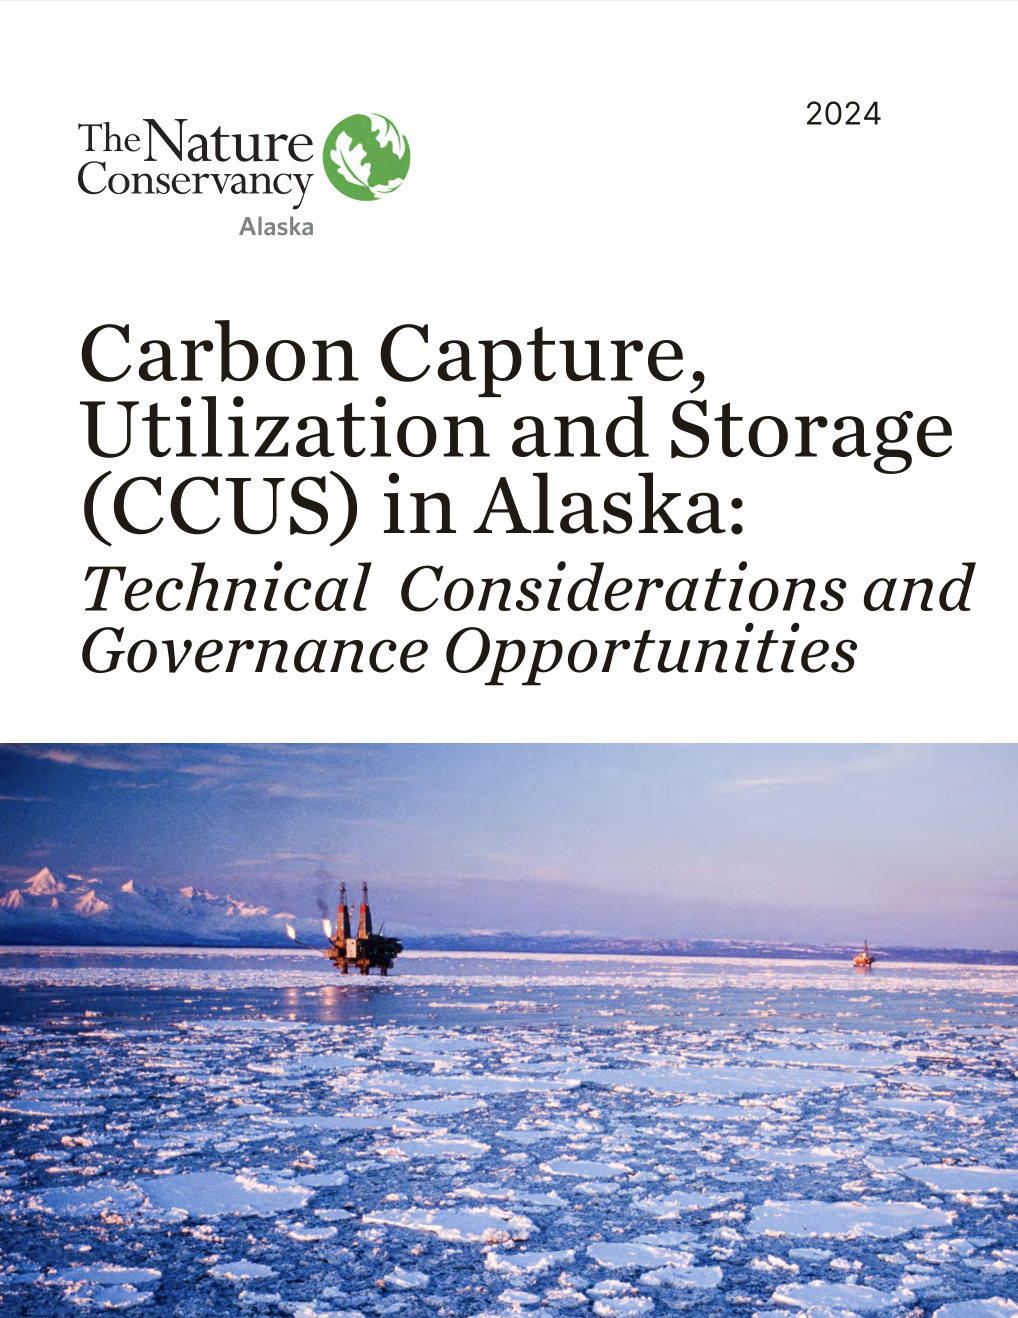 Cover of Carbon Capture, Utilization and Storage in Alaska report.